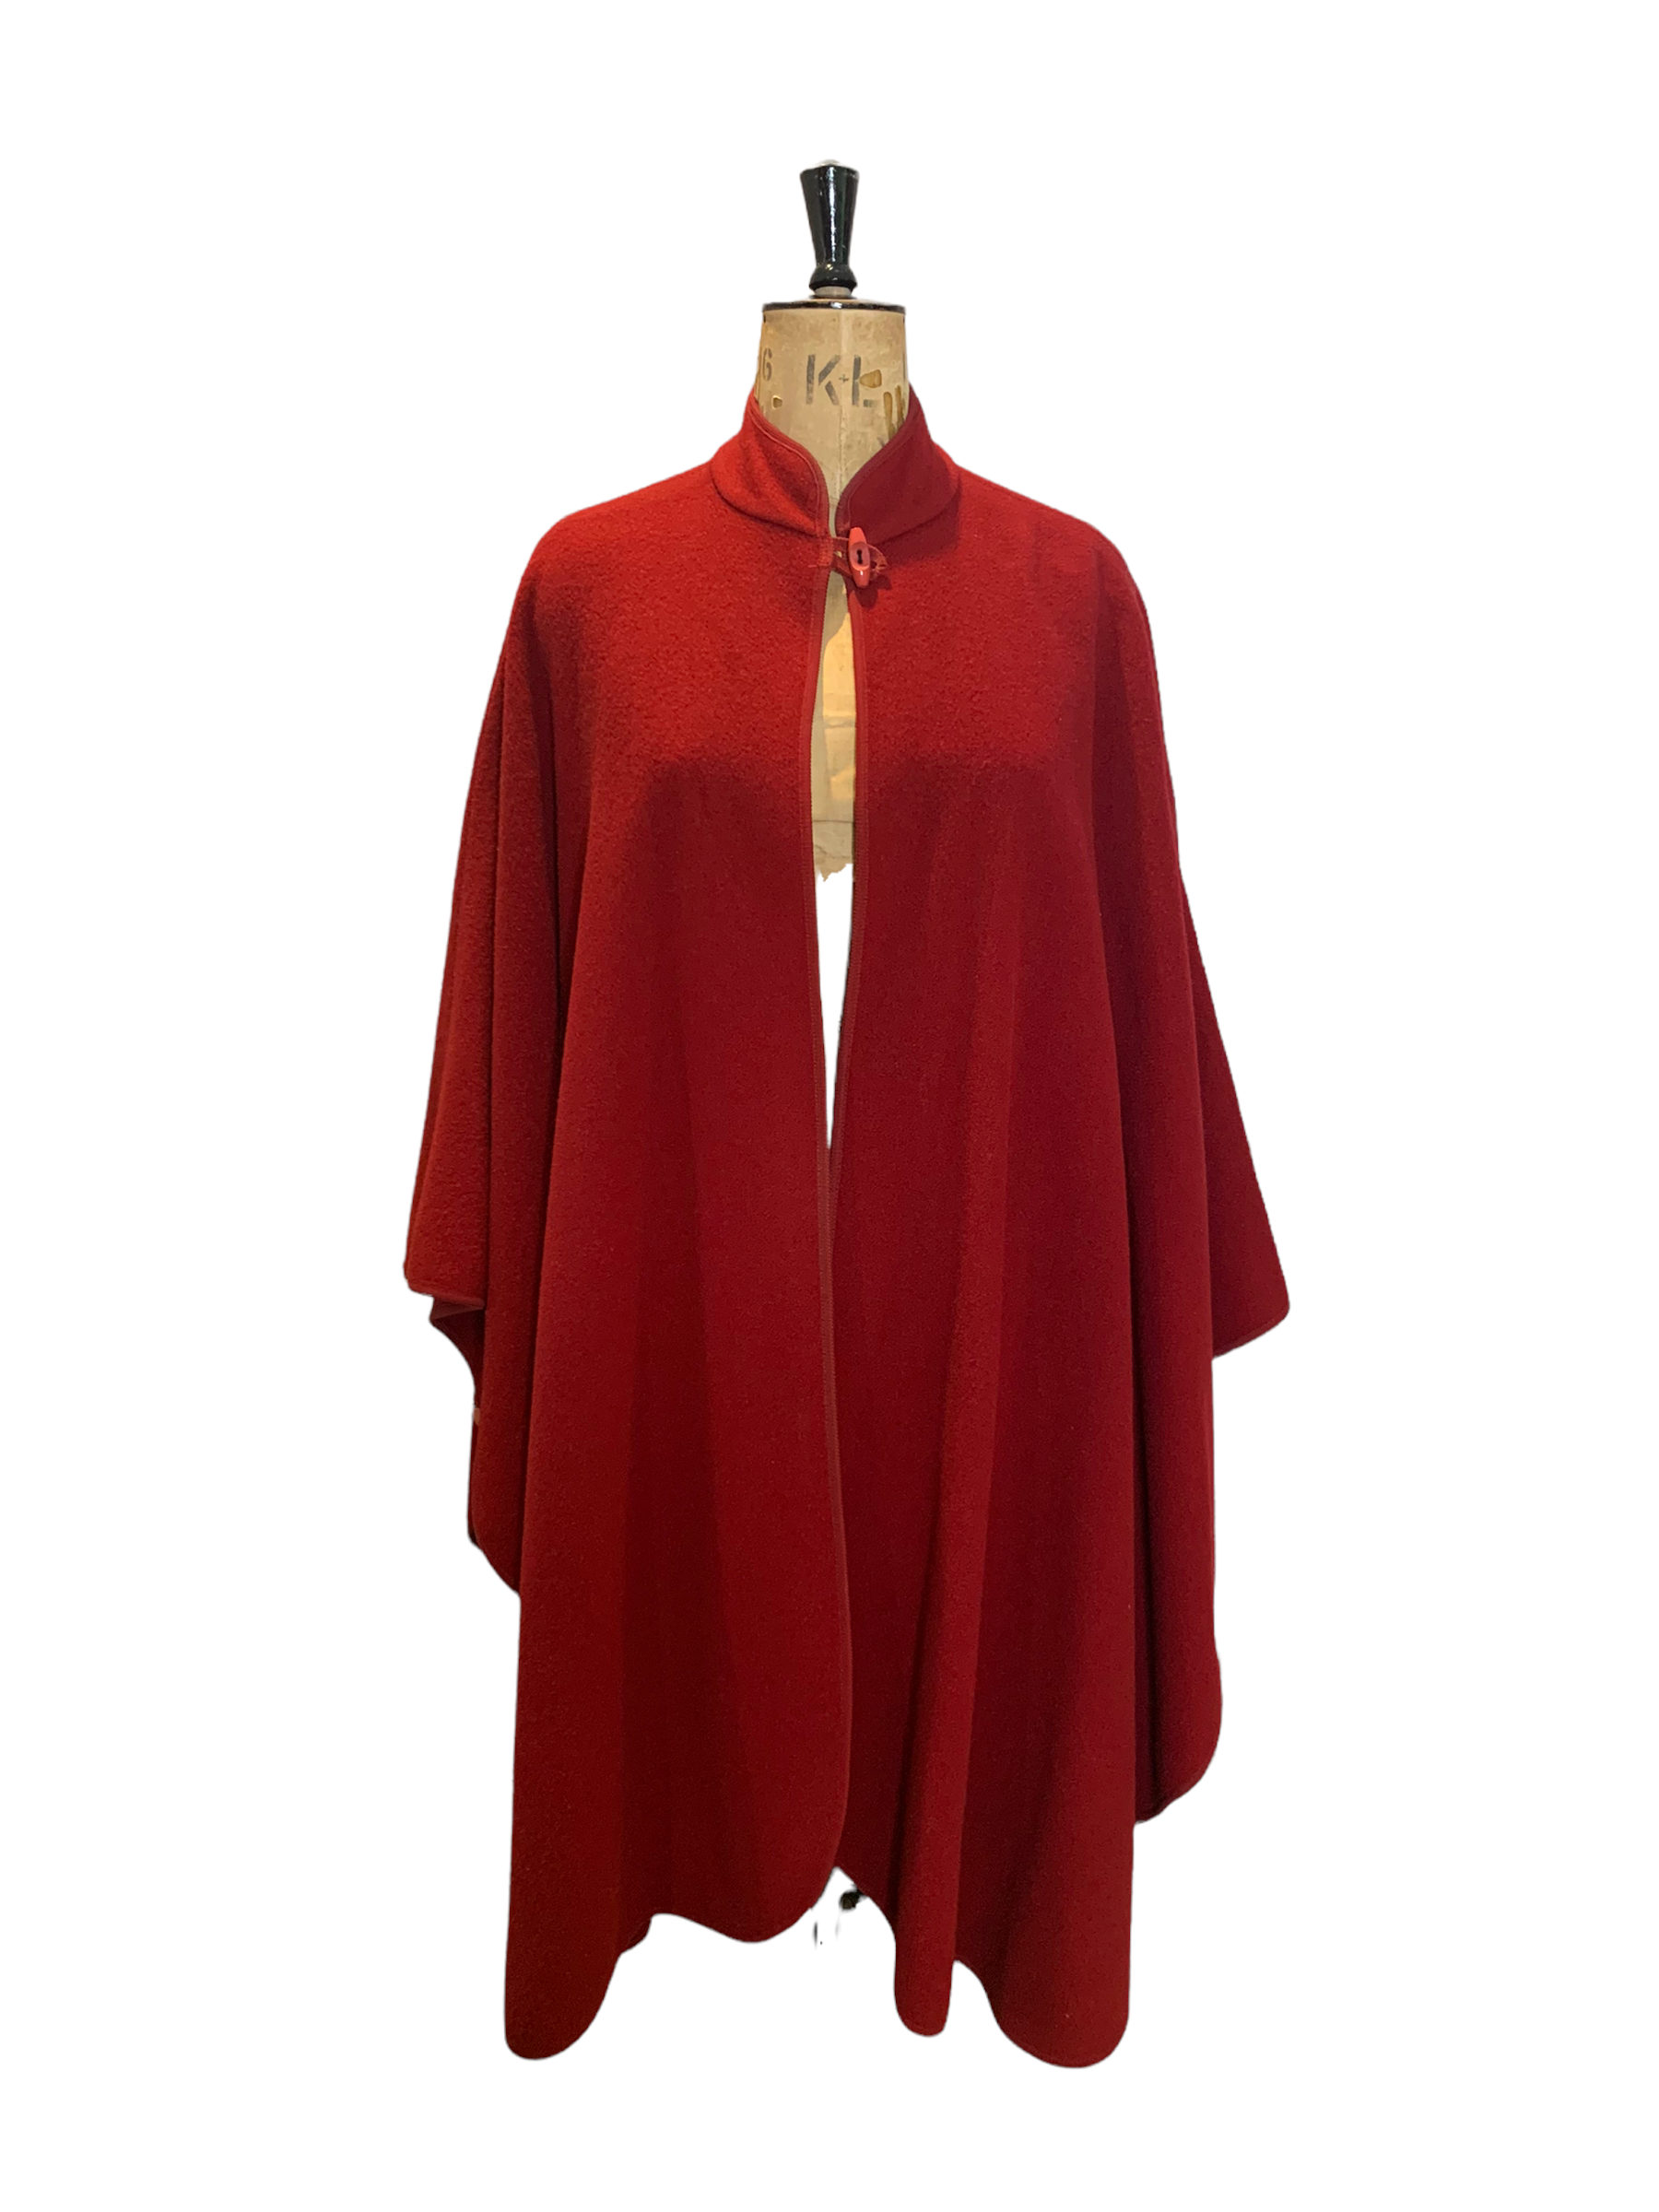 Vintage Red Wool Cape One Size